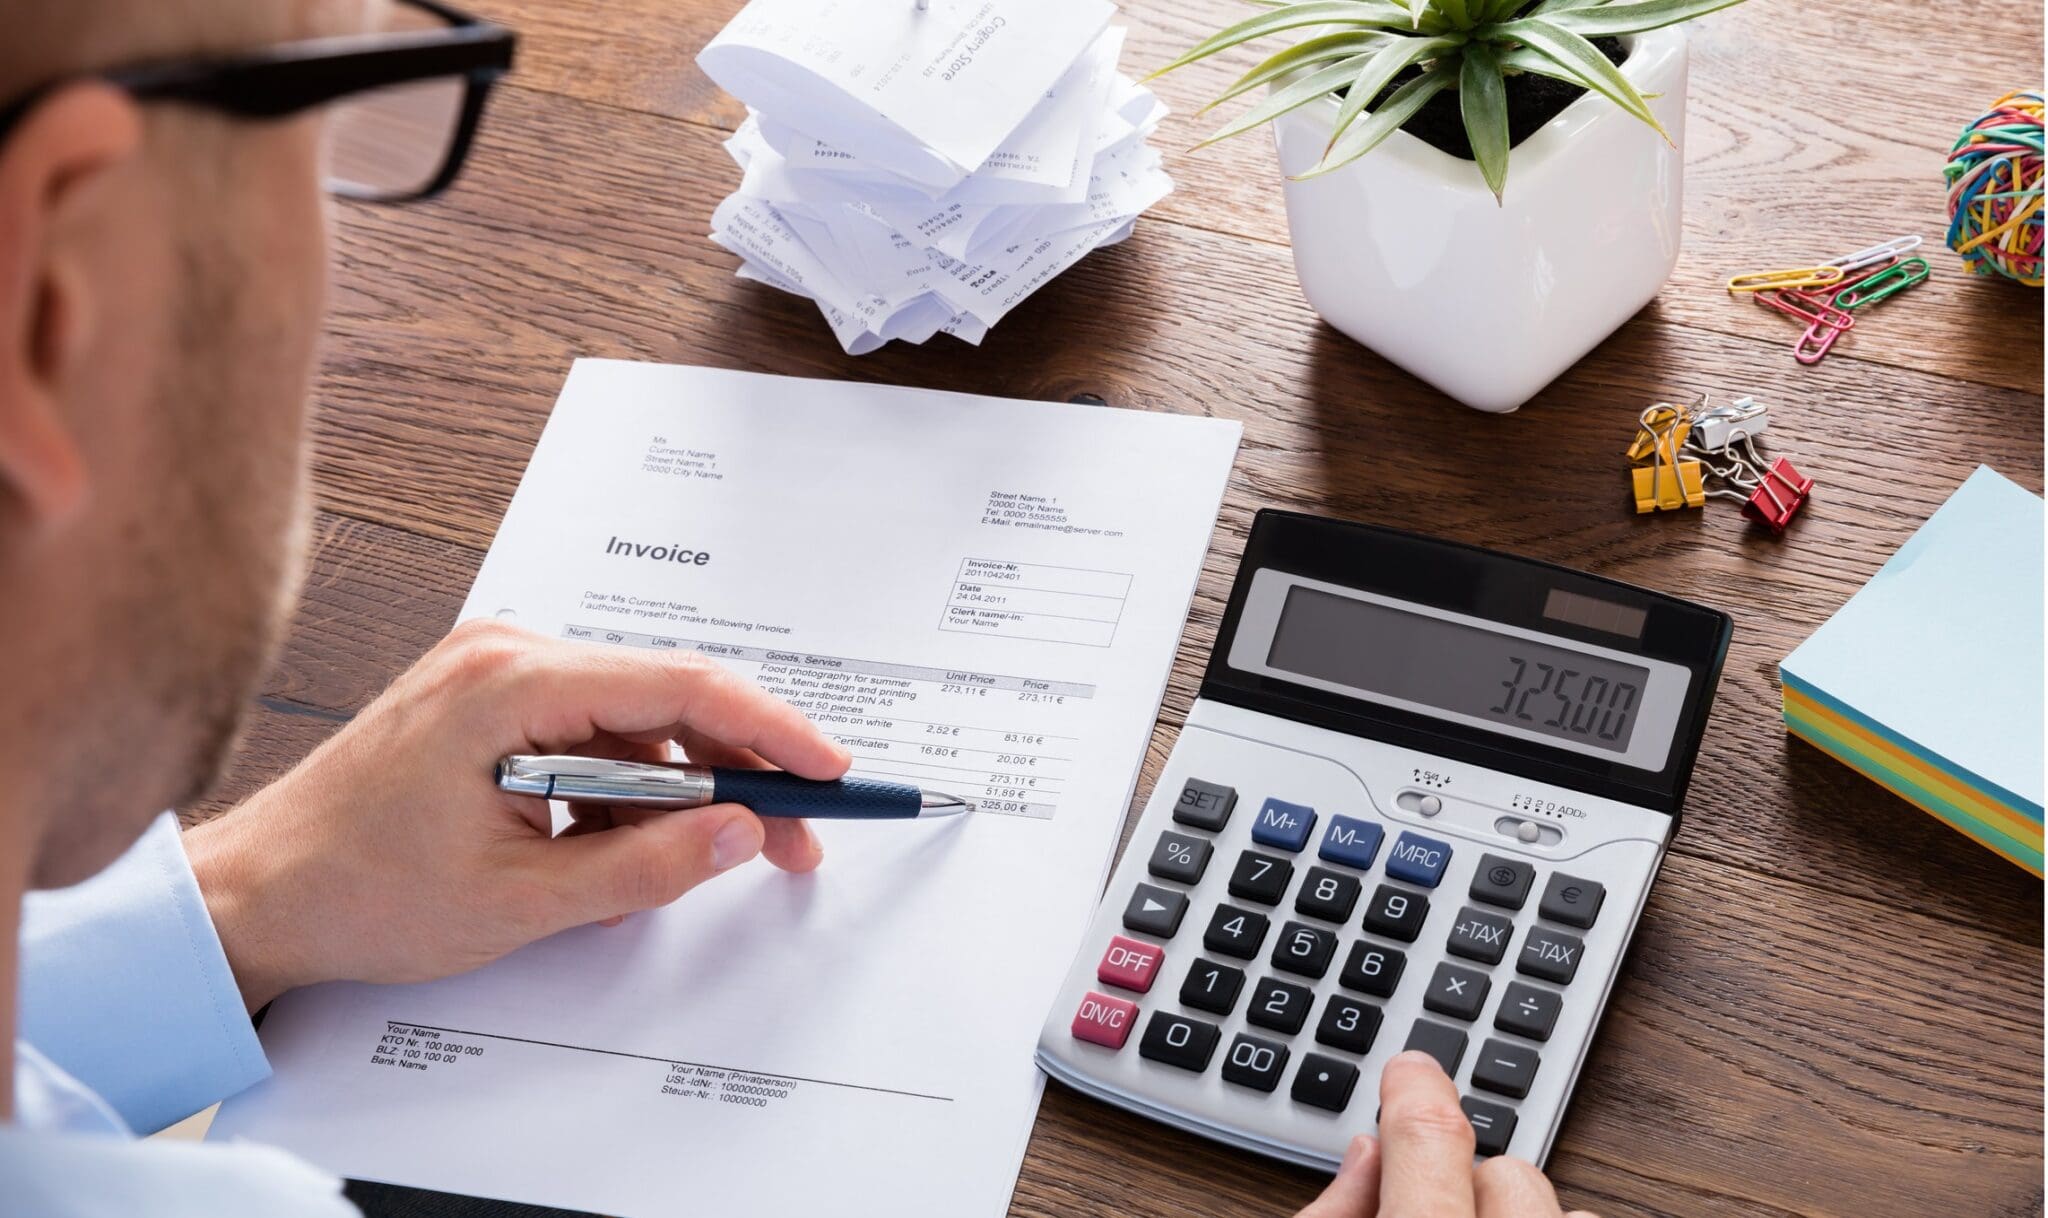 Could invoice financing be the solution for you and your business?